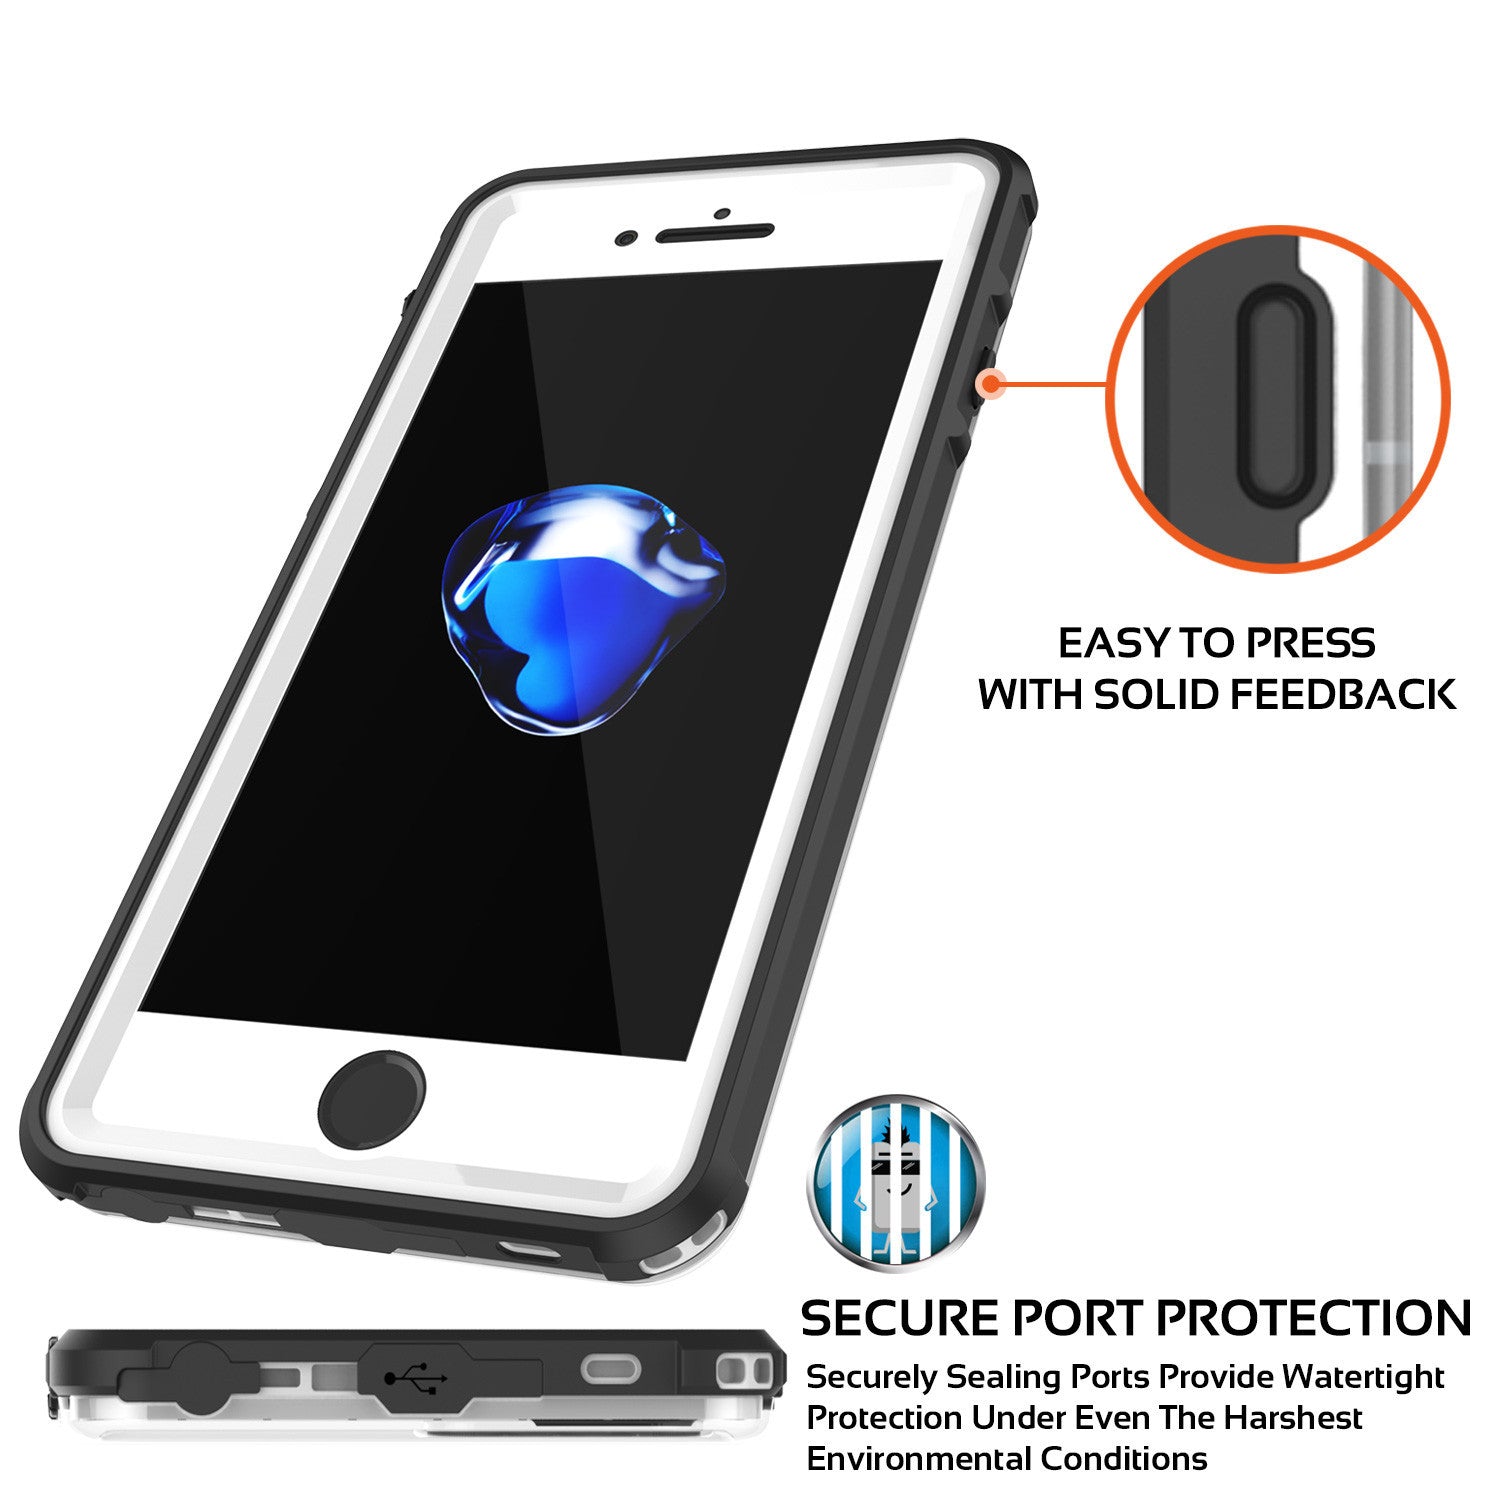 iPhone 7+ Plus Waterproof Case, PUNKcase CRYSTAL White W/ Attached Screen Protector | Warranty